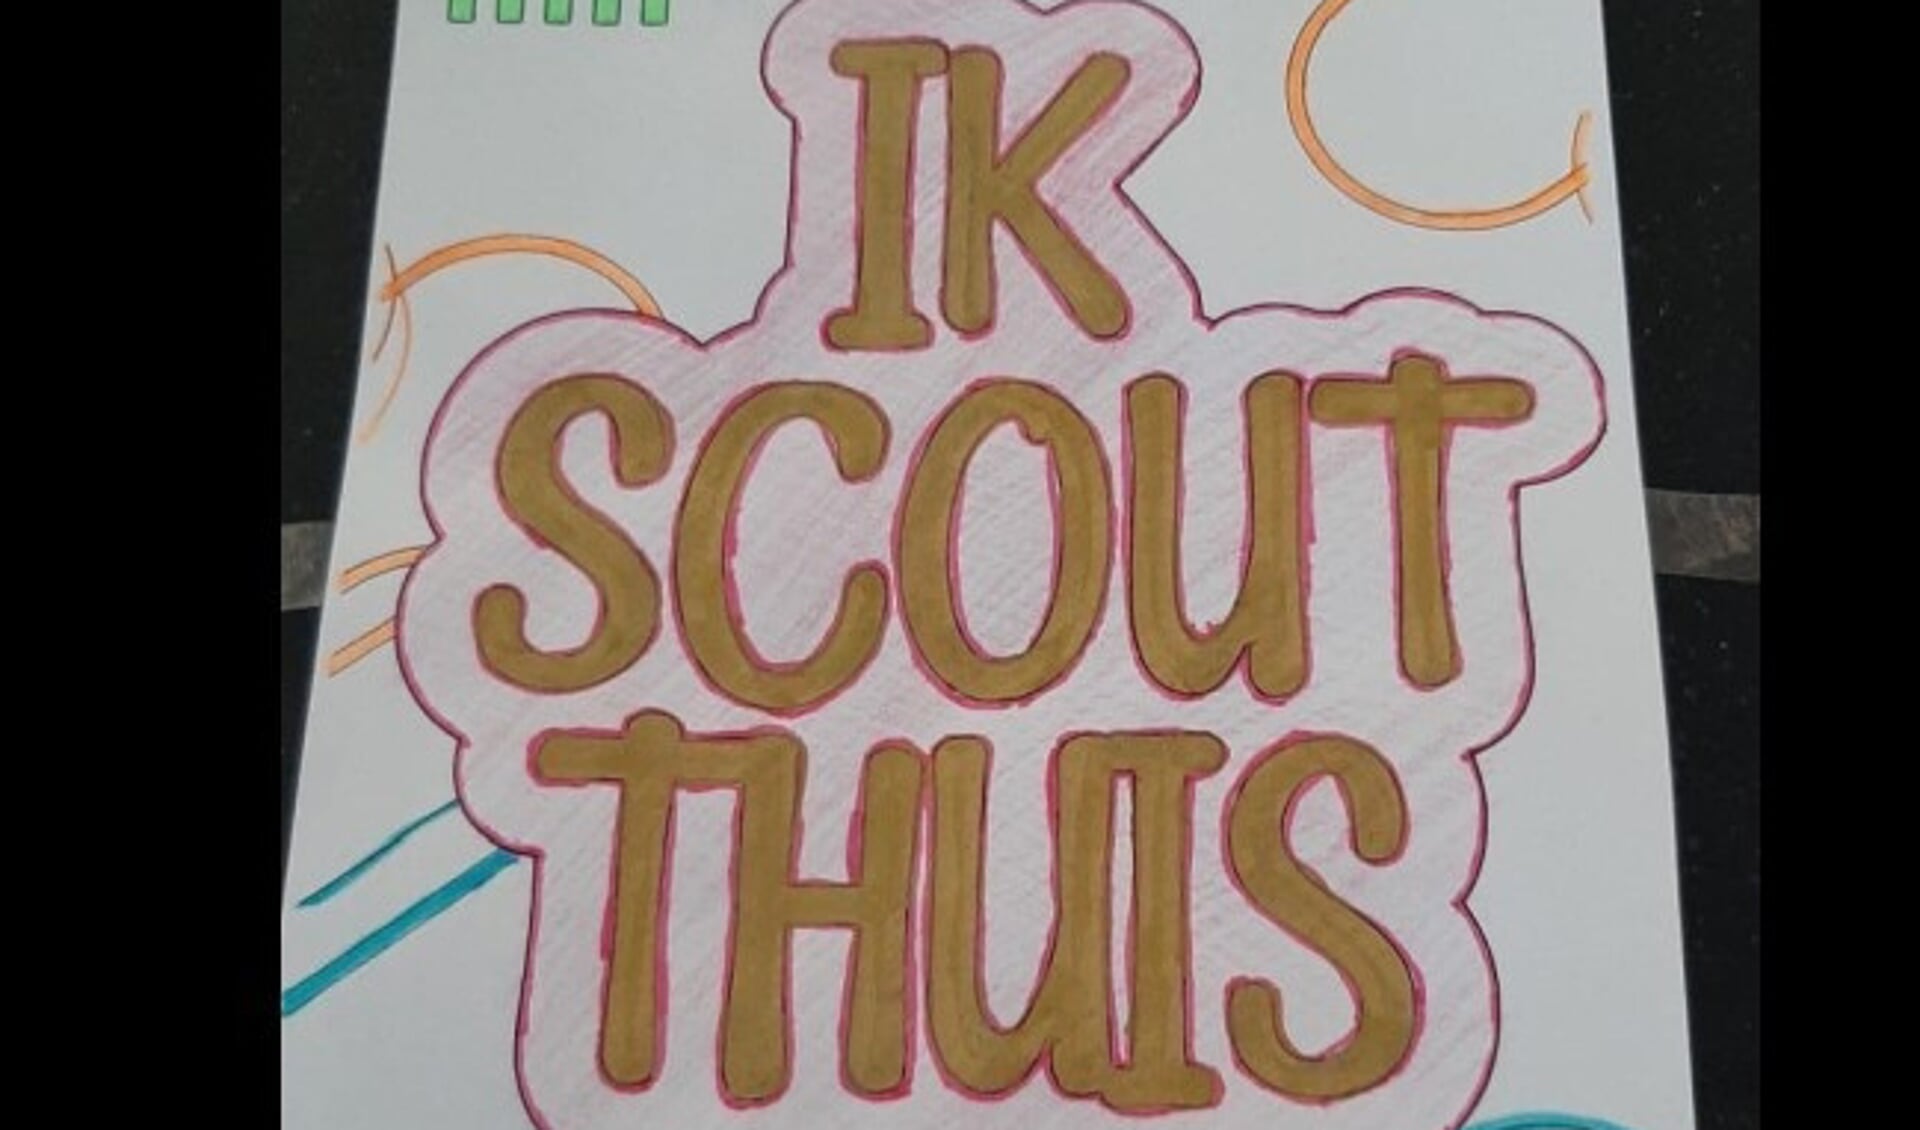 Mira Ceti Scout thuis 